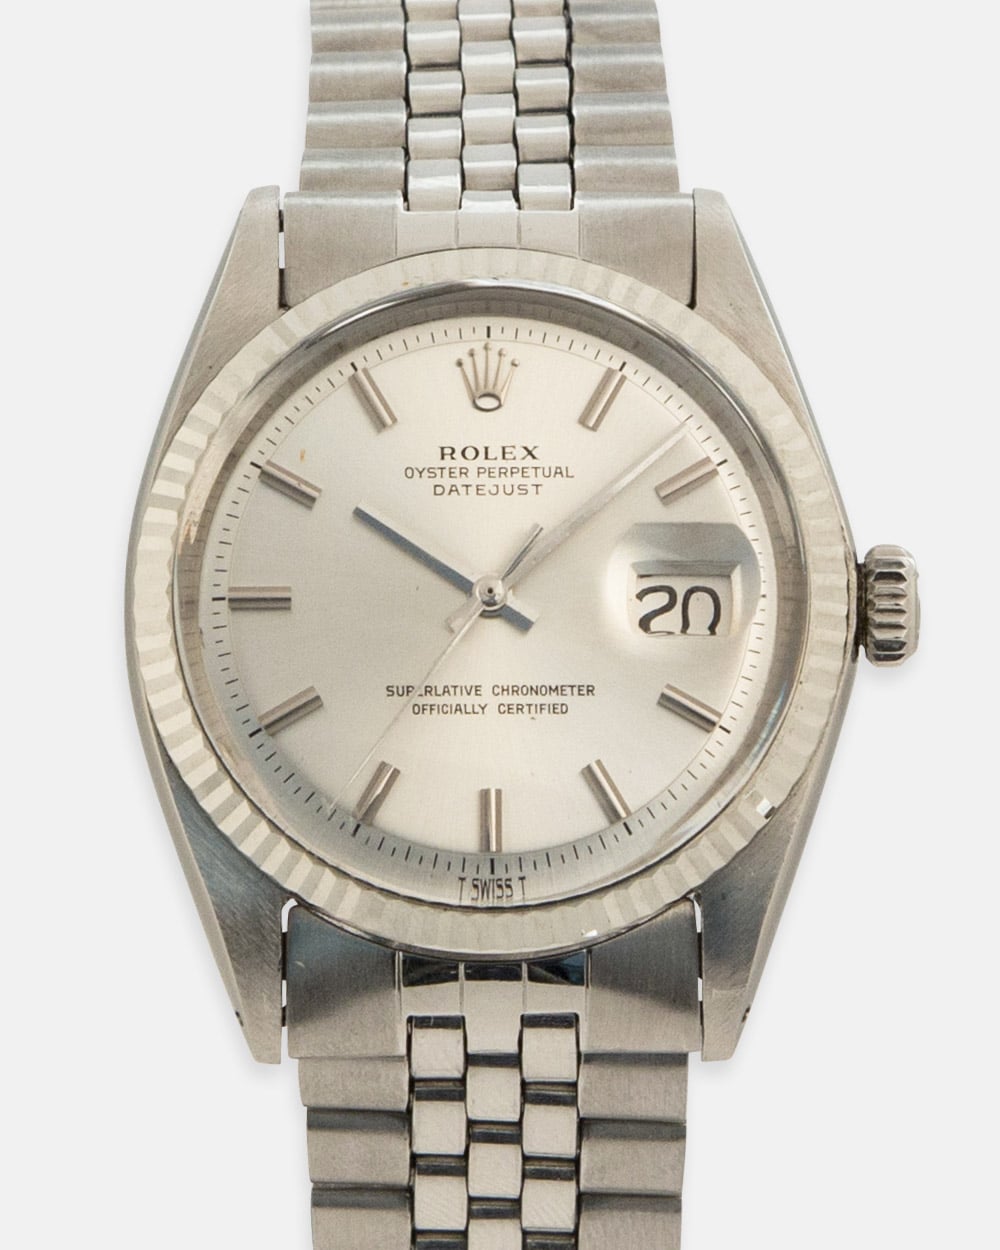 Rolex Perpetual Datejust Ref.1601 - Automatic - 1960's-1970's